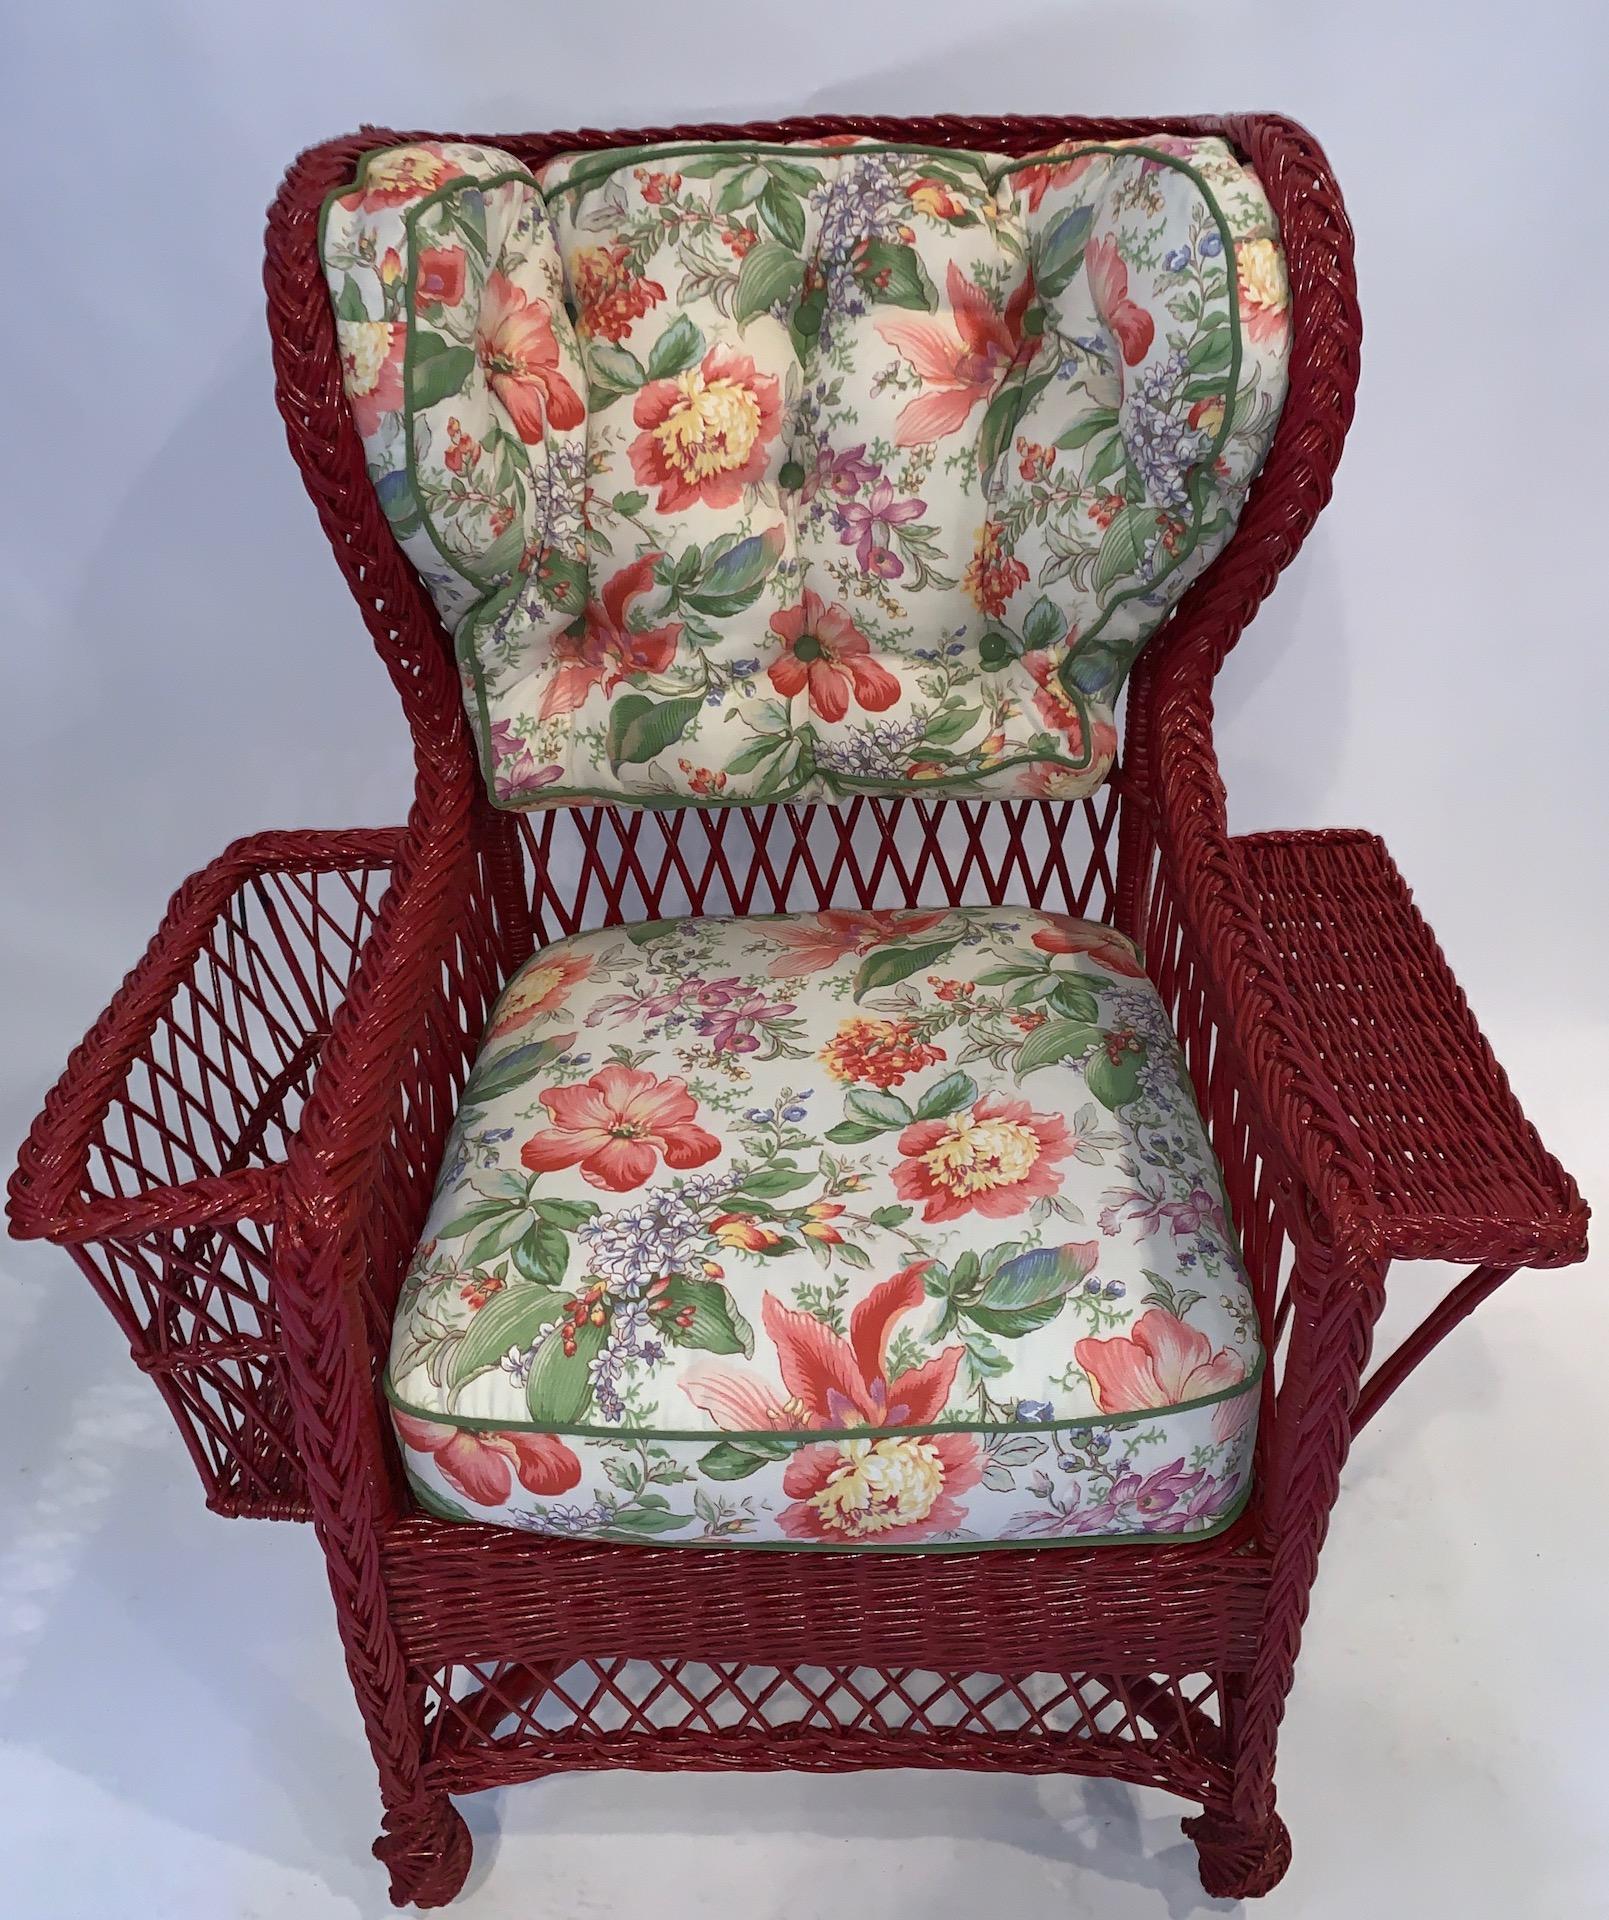 An exceptional large Bar Harbor style wing chair, C. 1900, American with oversized wings, paddle arm and magazine pocket.It is all hand woven including the four intricate pineapple feet. This is one of four complimentary wicker pieces we are